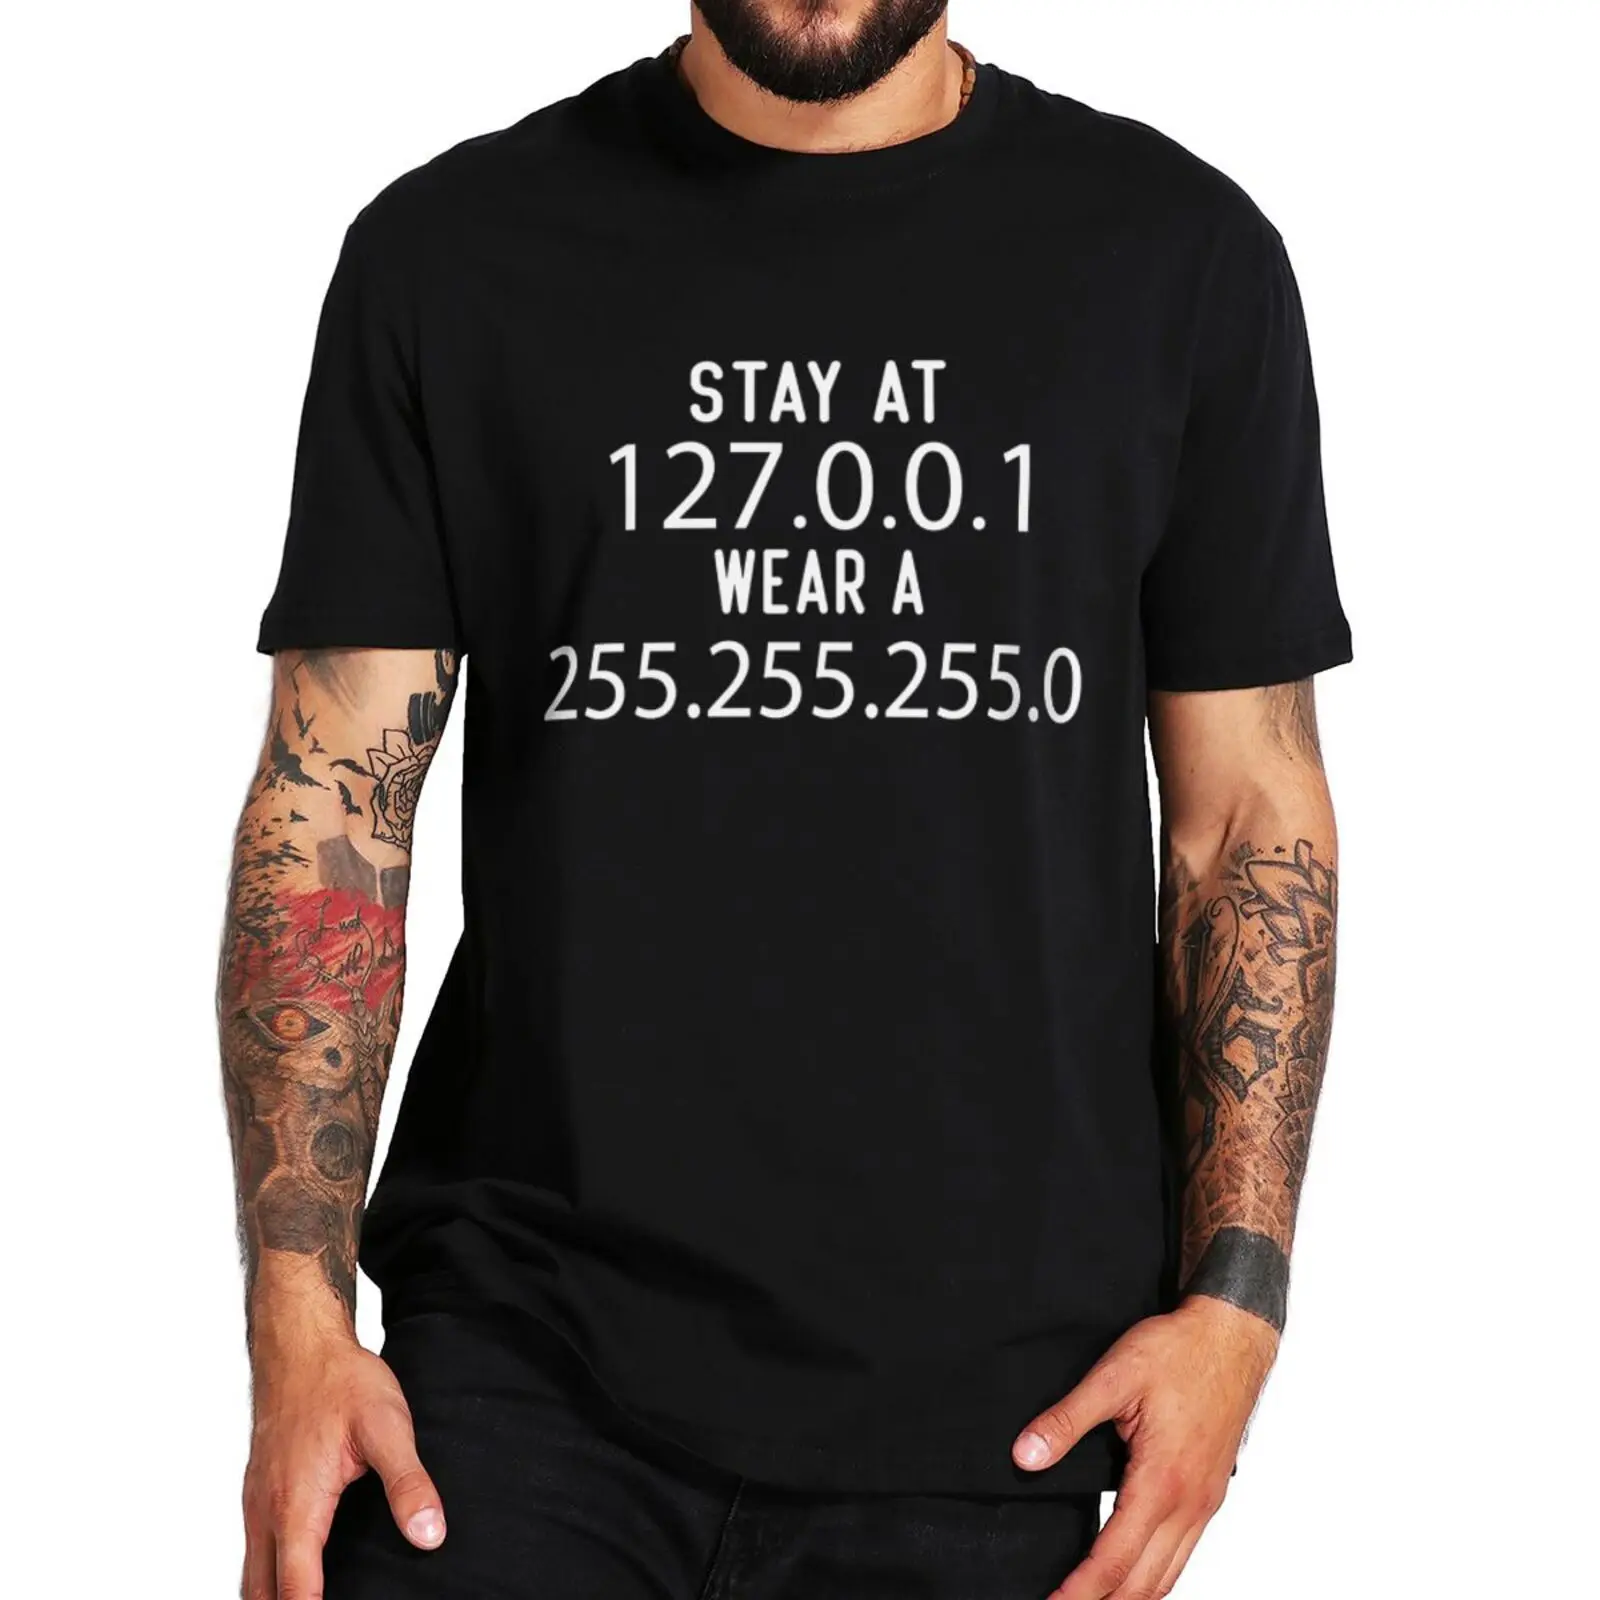 

Stay At Home And Wear Mask T Shirt Funny 127.0.0.1 Code Geek Nerd Gift Short Sleeve EU Size Cotton Unisex Summer T-shirts